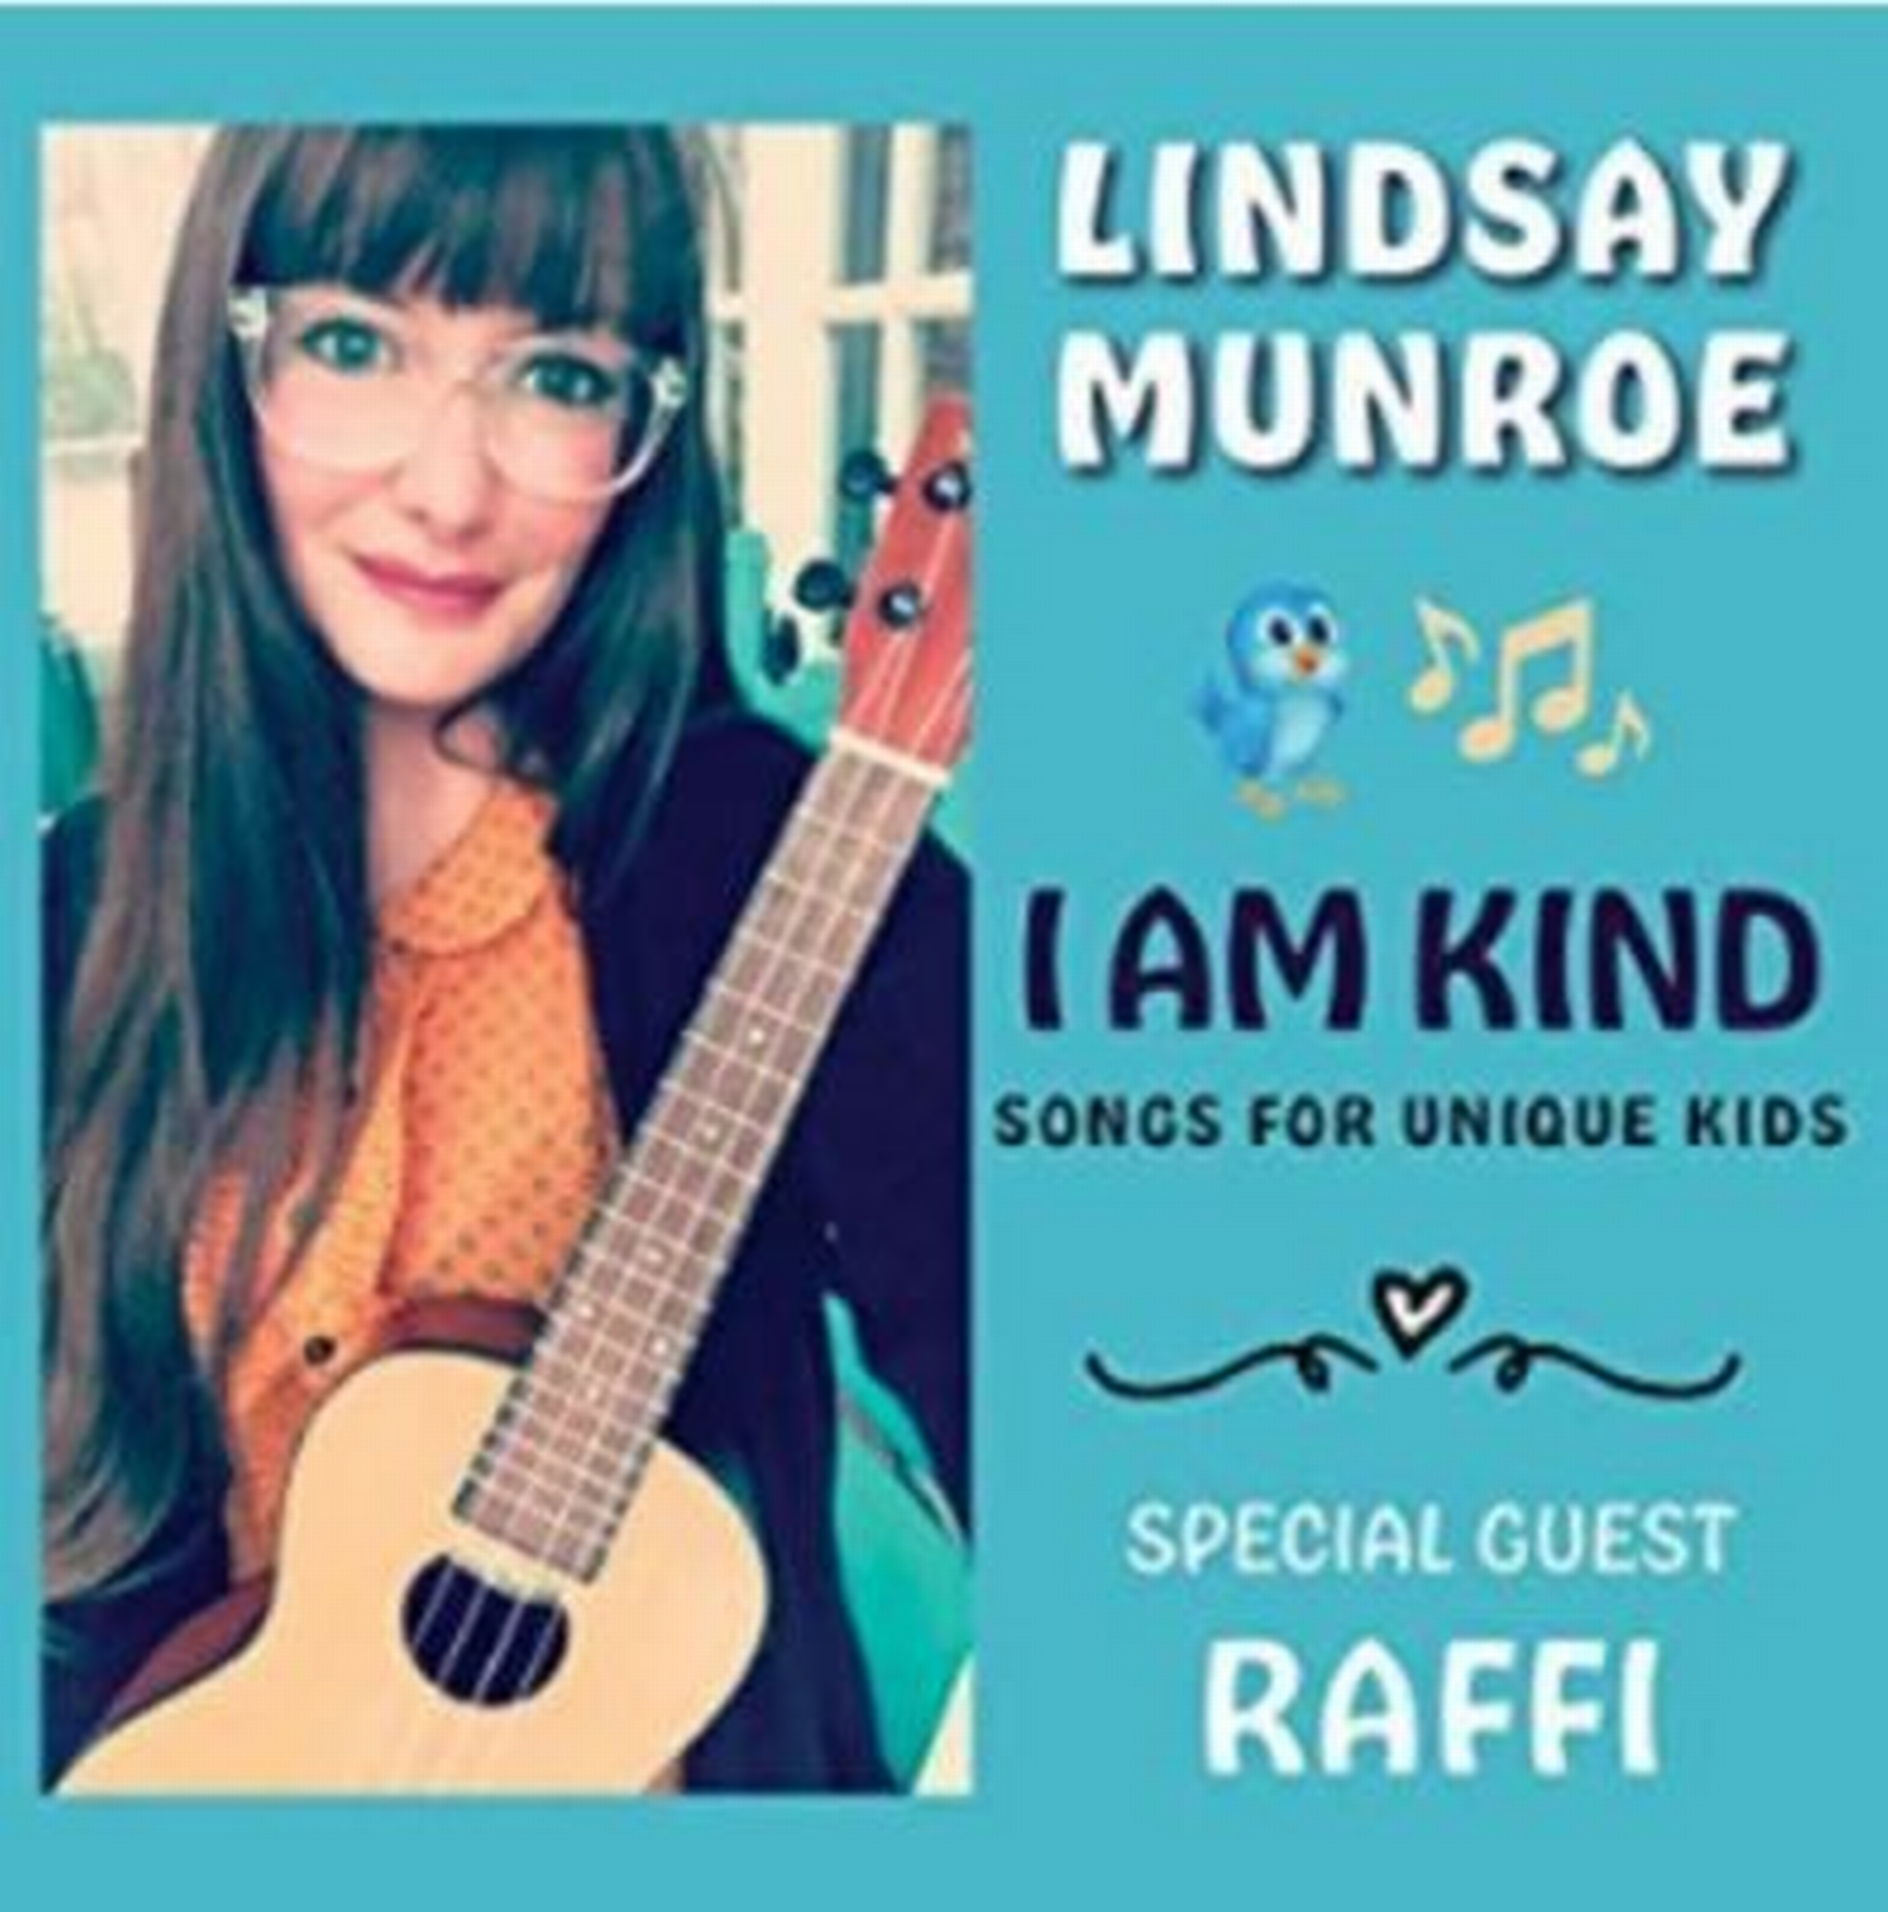 I am kind – songs for unique kids